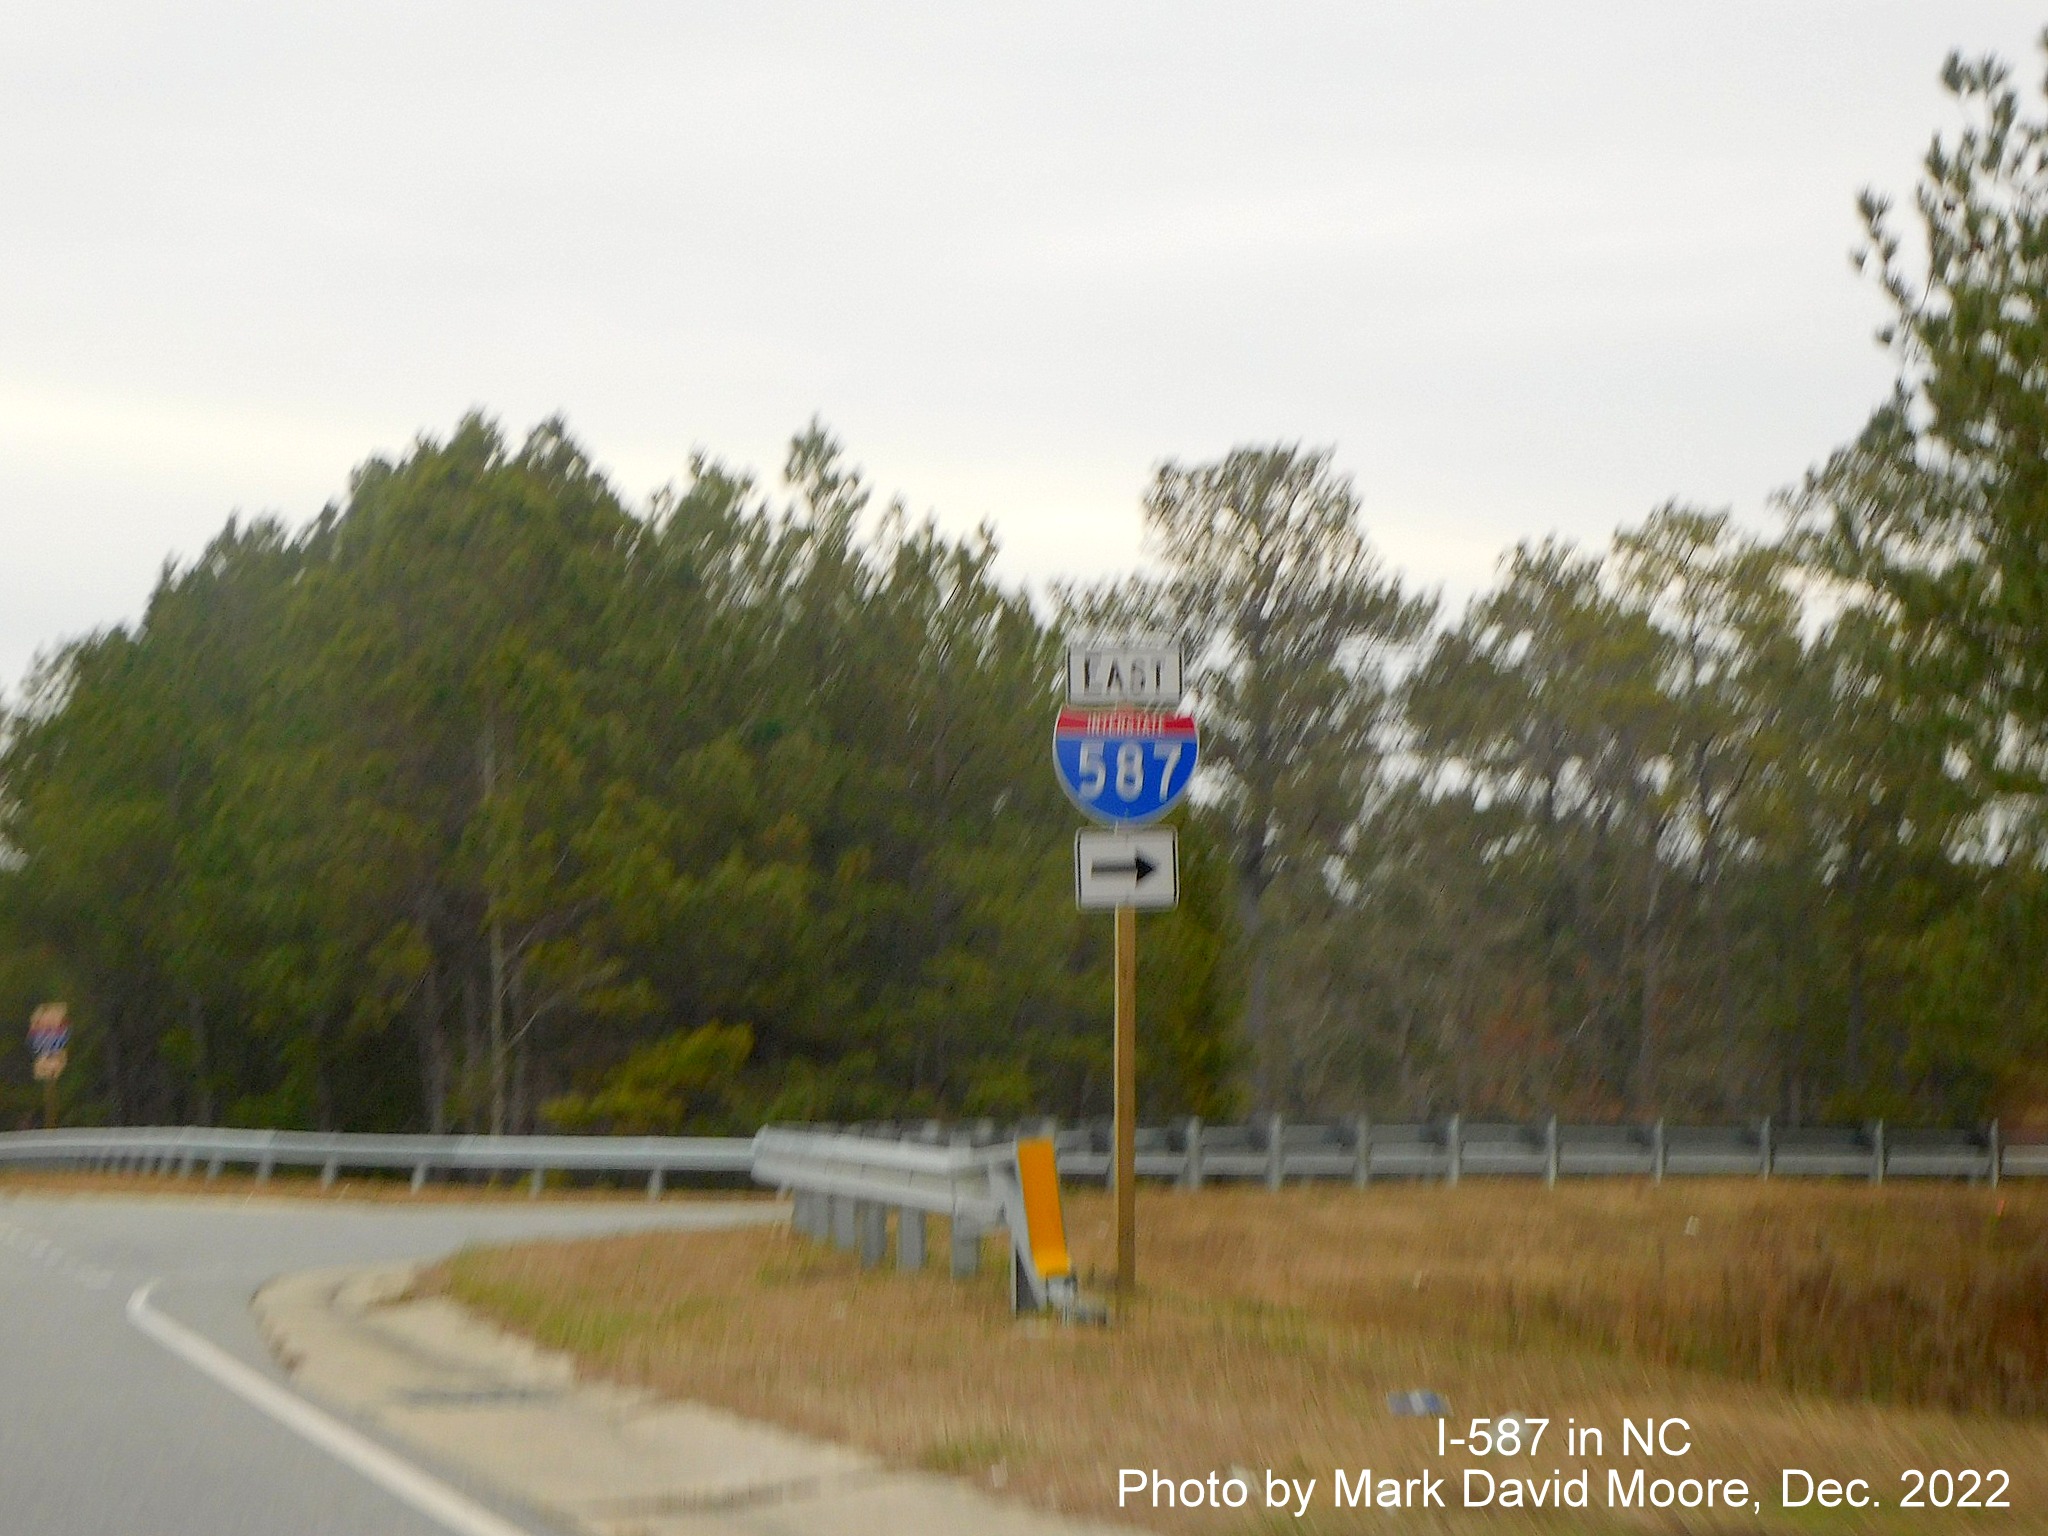 Image of East I-587 trailblazer on NC 91 North in Walstonburg, photo by Mark David Moore, December 2022